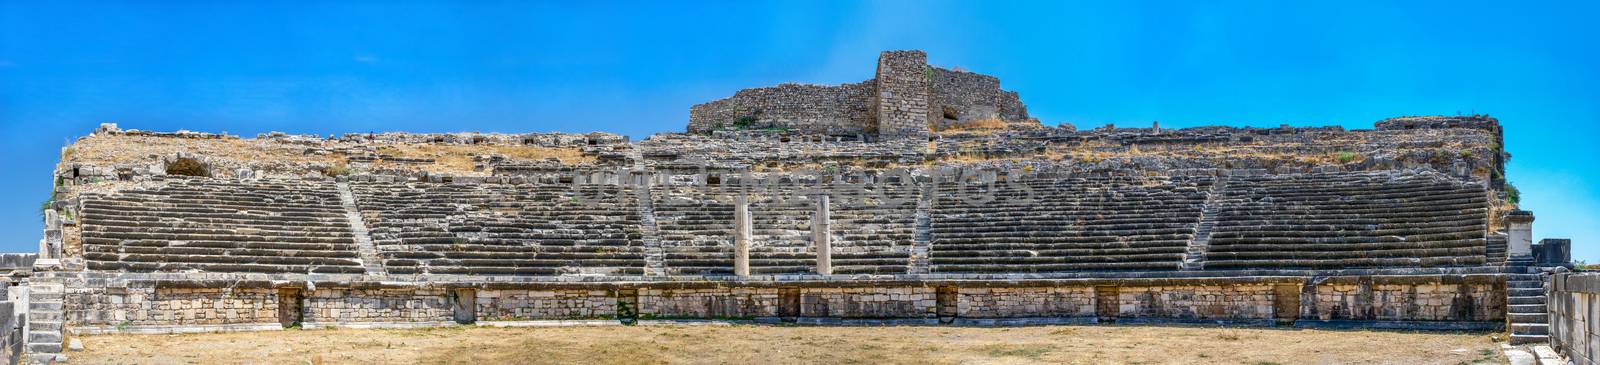 The interior of the Miletus Ancient Theatre in Turkey by Multipedia